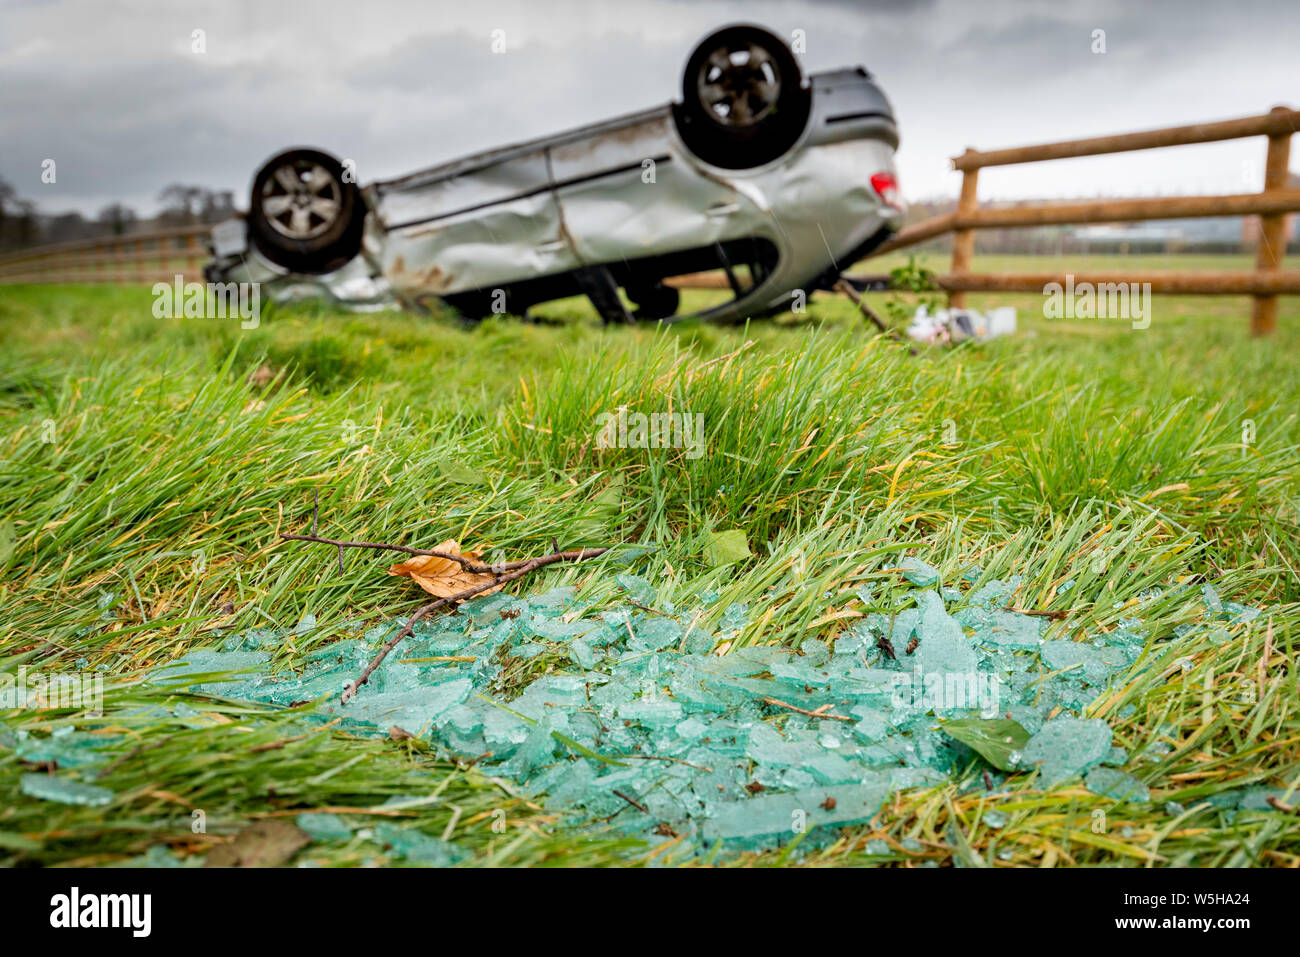 Car Accident Image Crashed Cars Driver Stock Photo 472128211